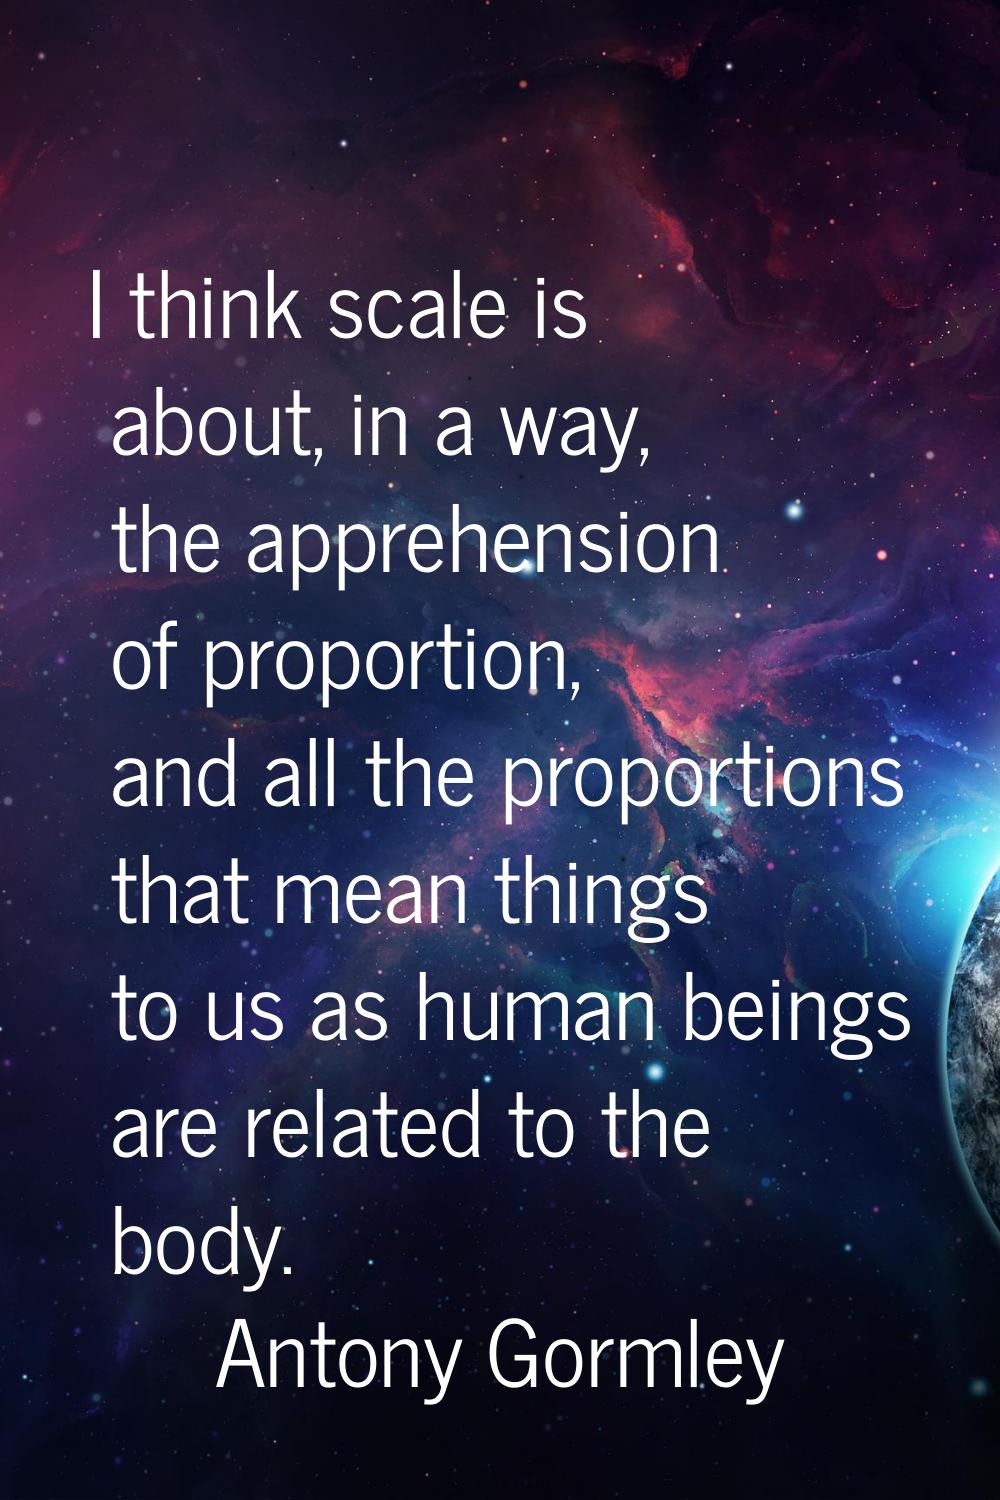 I think scale is about, in a way, the apprehension of proportion, and all the proportions that mean